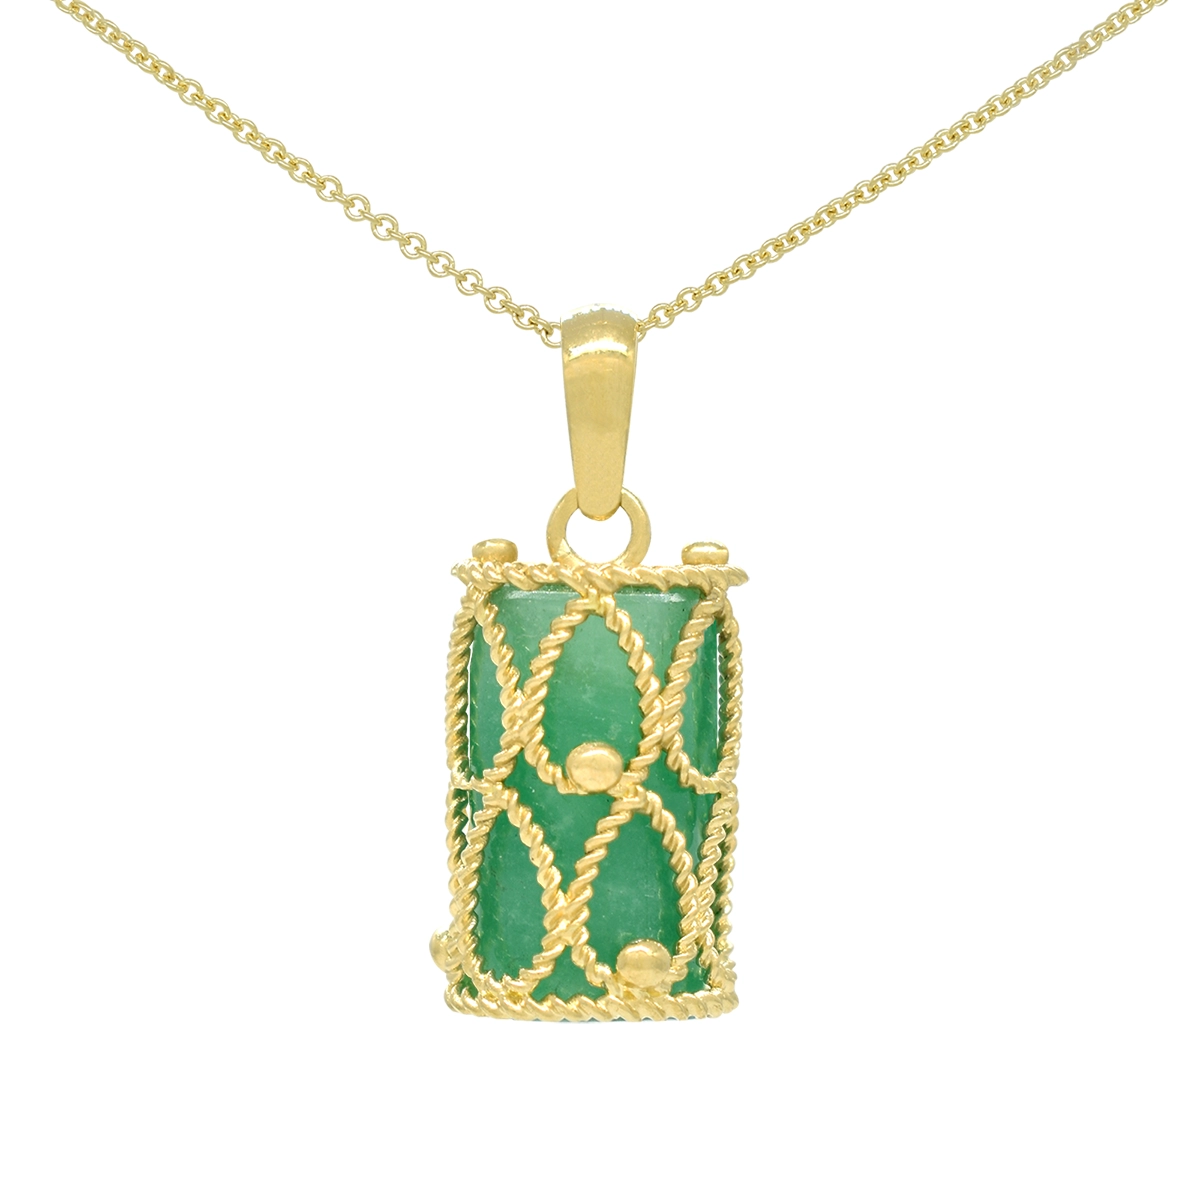 Emerald pendant handcrafted in 18K gold with 11.40 carats natural Colombian emerald in a long cylindrical bead-style shape.